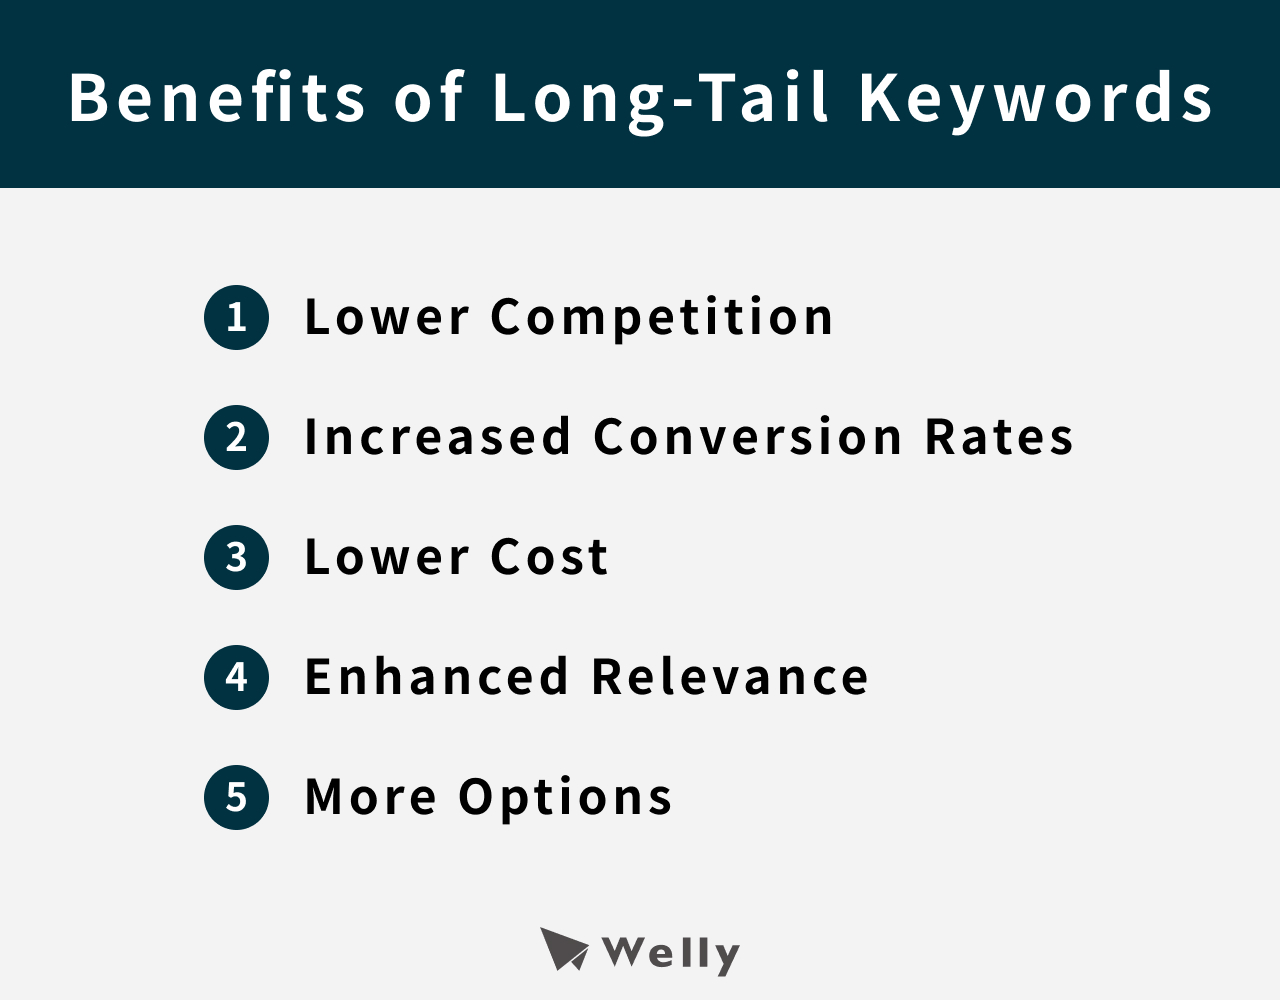 The Benefits of Long-Tail Keywords 